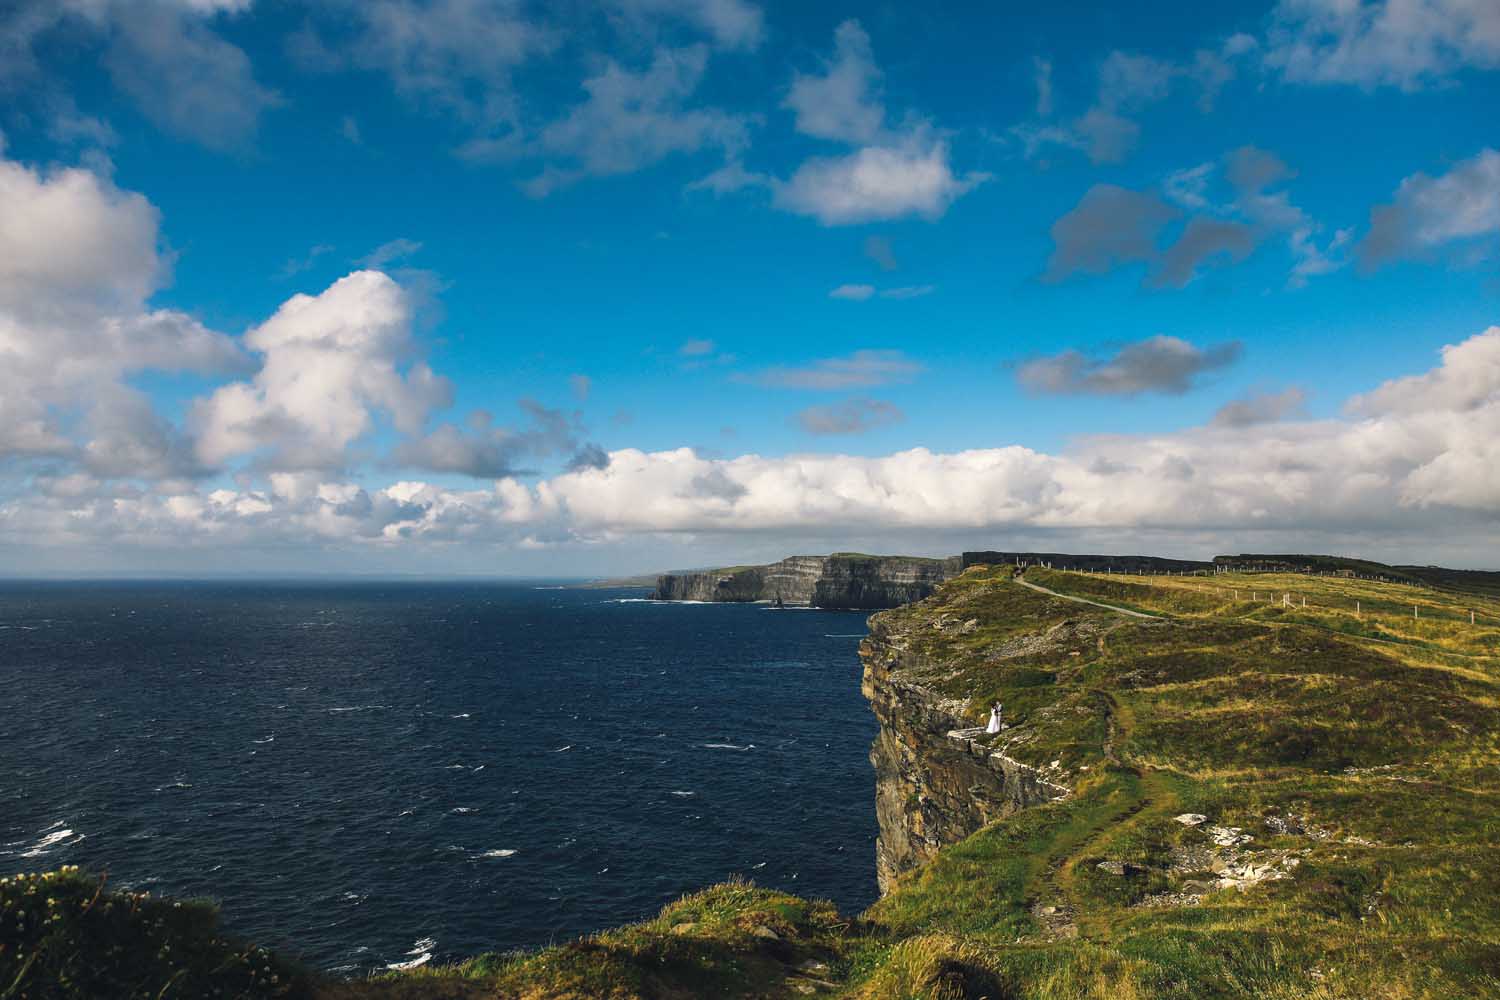 Coastline at The Cliffs of Moher, Co. Clare, Ireland